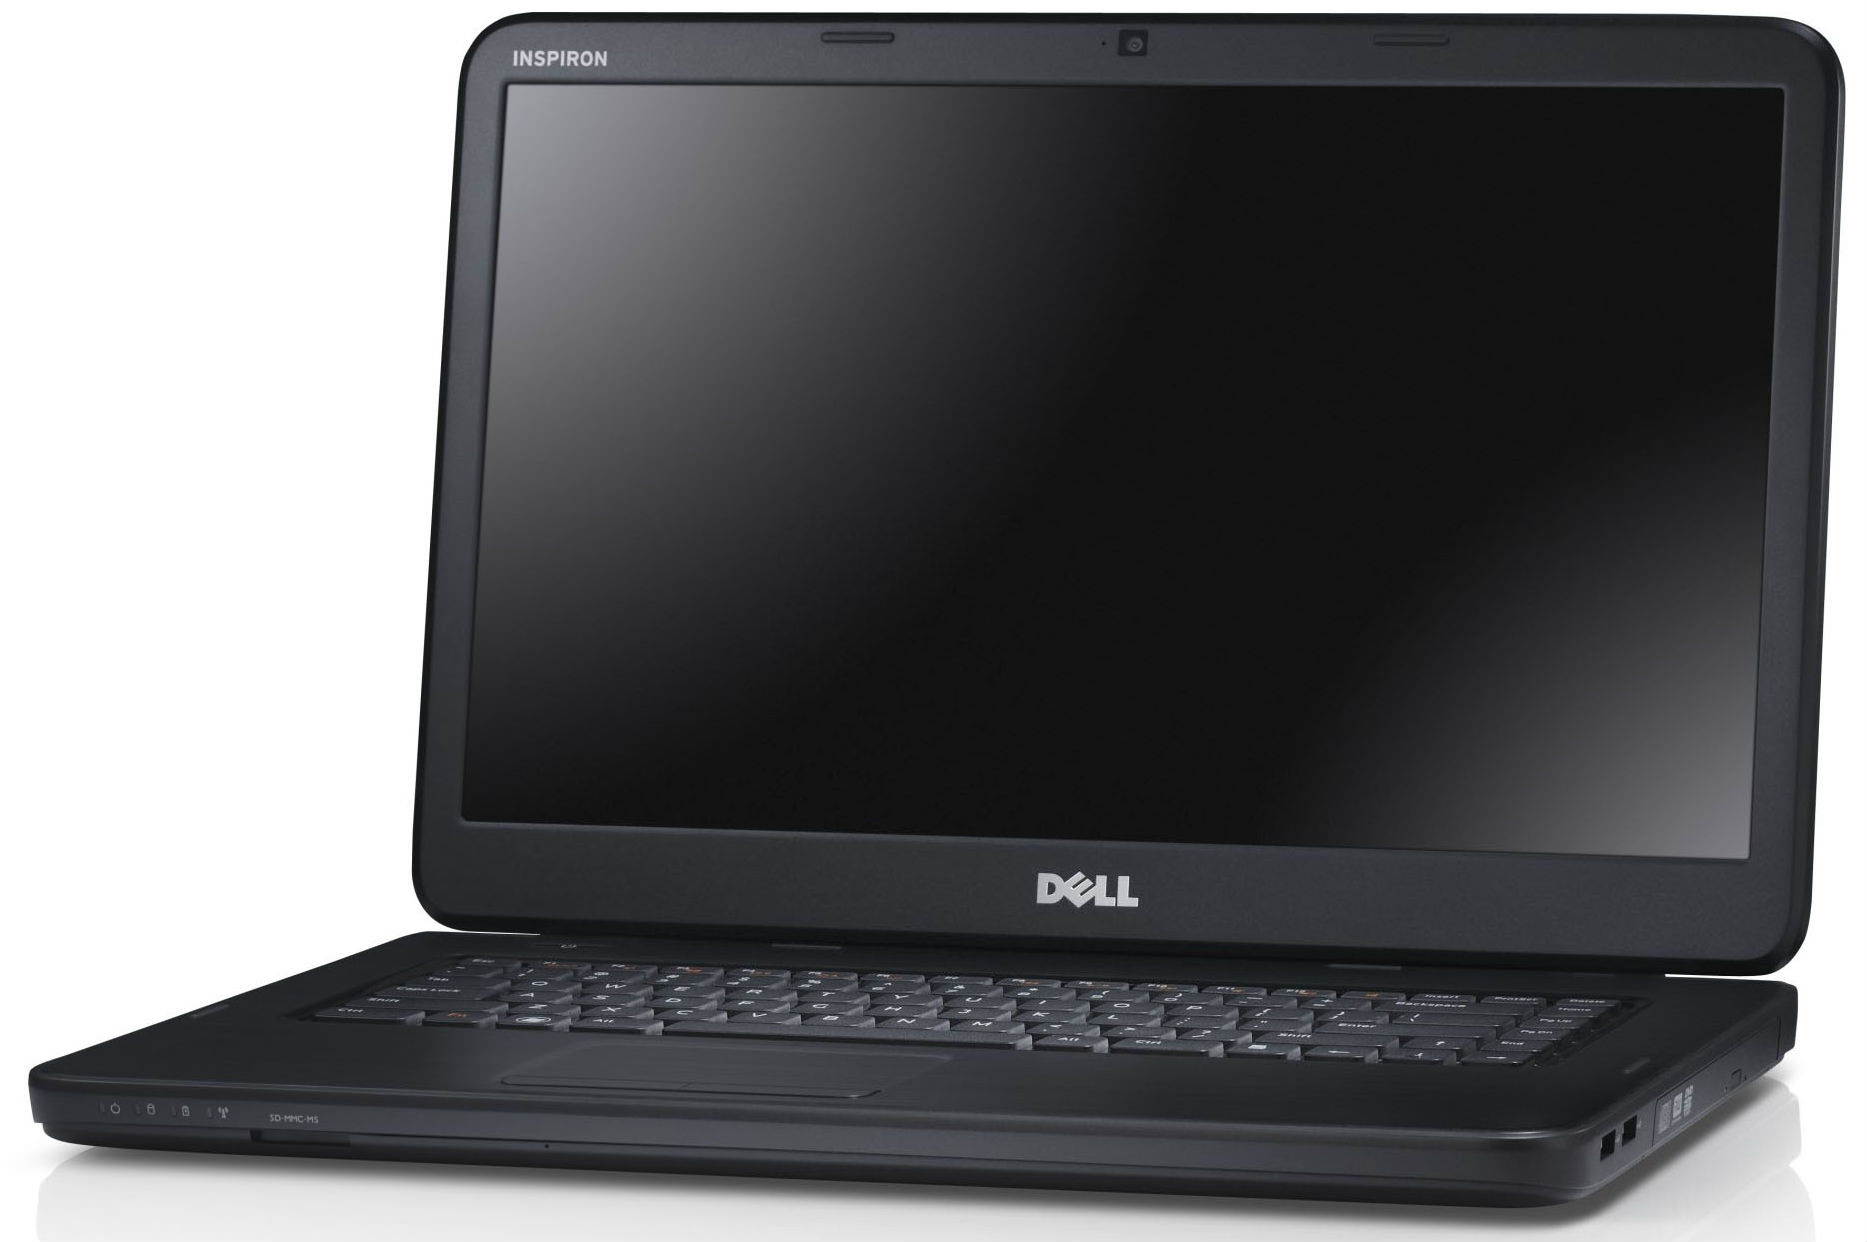 Dell Inspiron 15 Laptop (Core i3 2nd Gen/2 GB/500 GB/DOS) Price